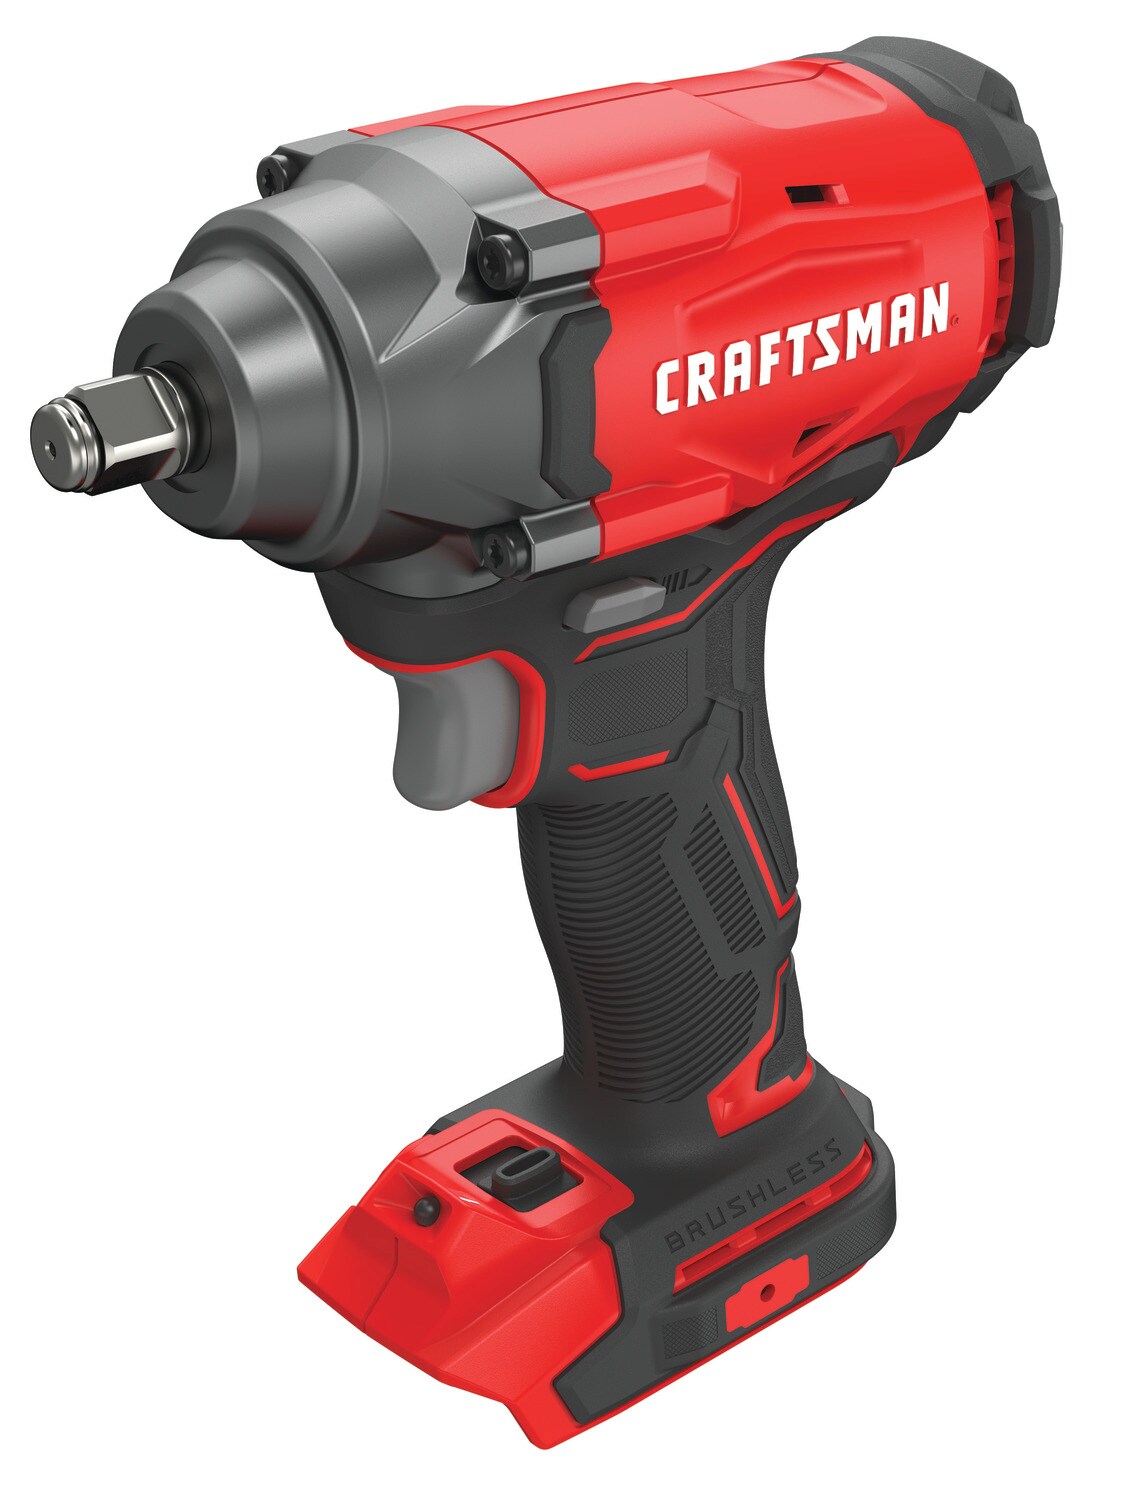 CRAFTSMAN V20 20-volt Max Variable Speed Brushless 1/2-in Drive Cordless Impact Wrench (Tool Only)